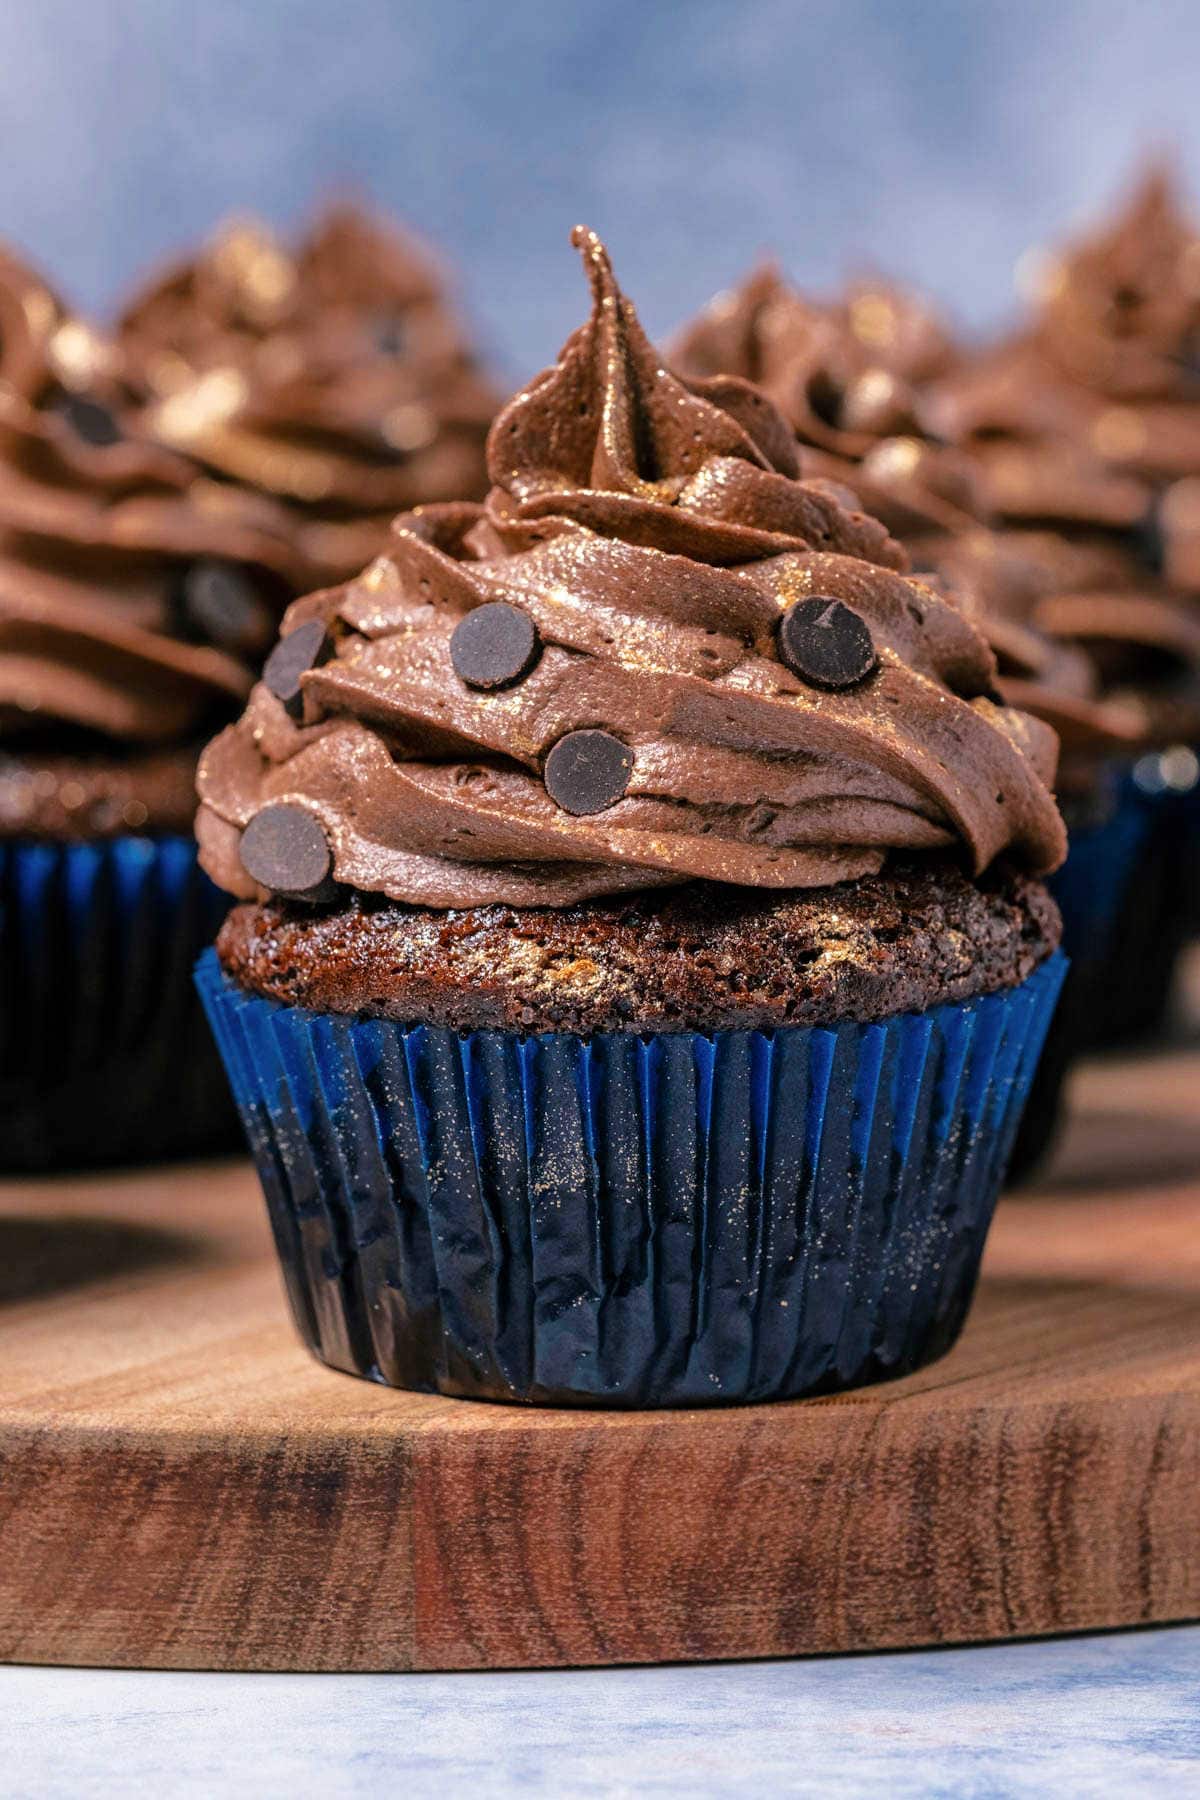 Eggless chocolate cupcakes on a wooden board.